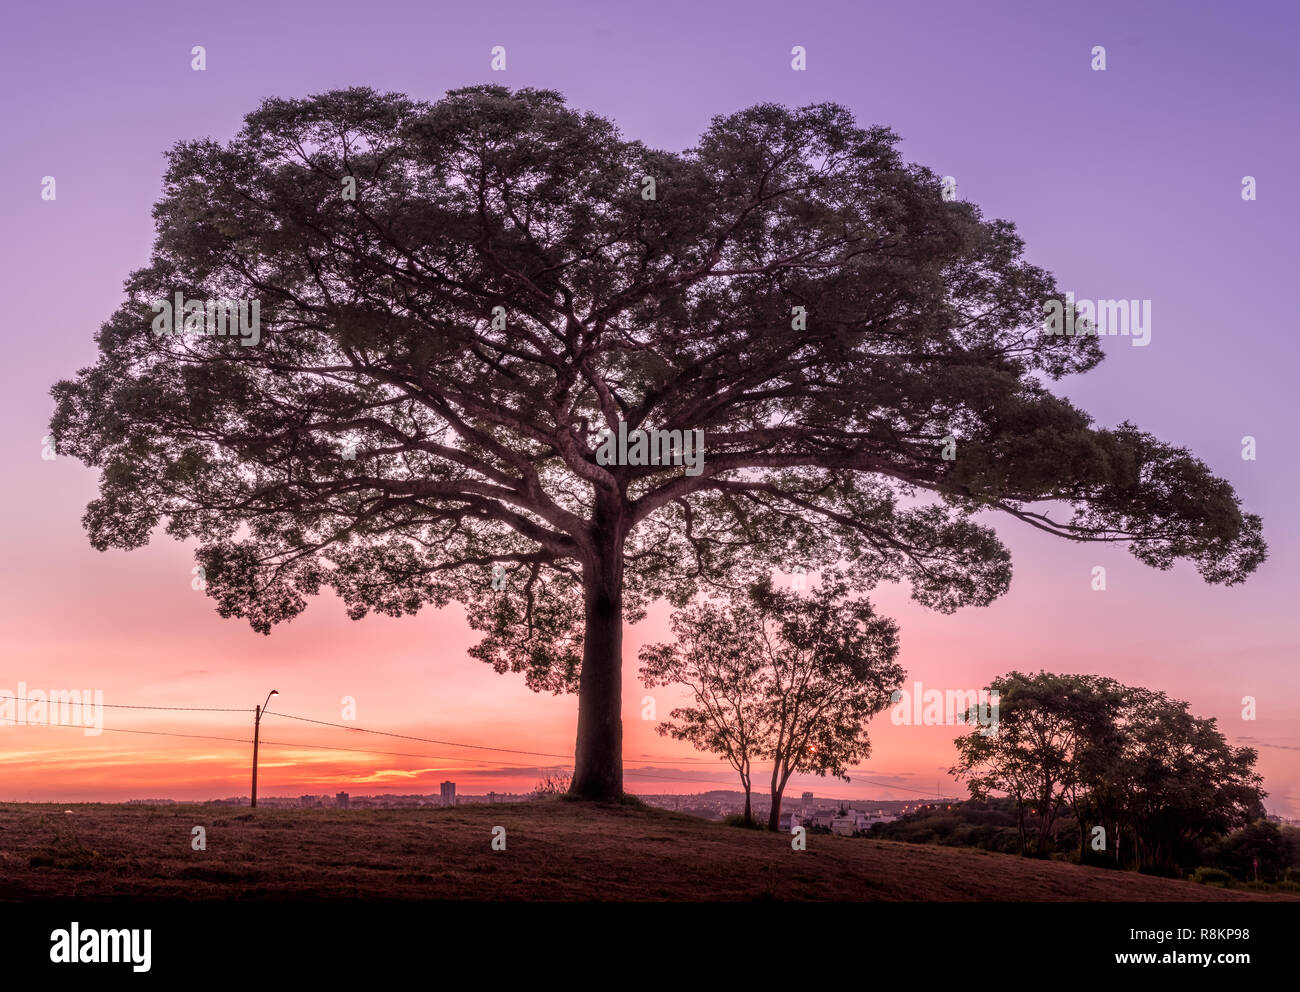 'Jequitibá' tree in Valinhos,SP/ Brazil against sunset sky. This tree is typical in the country and has 30 meters tall Stock Photo